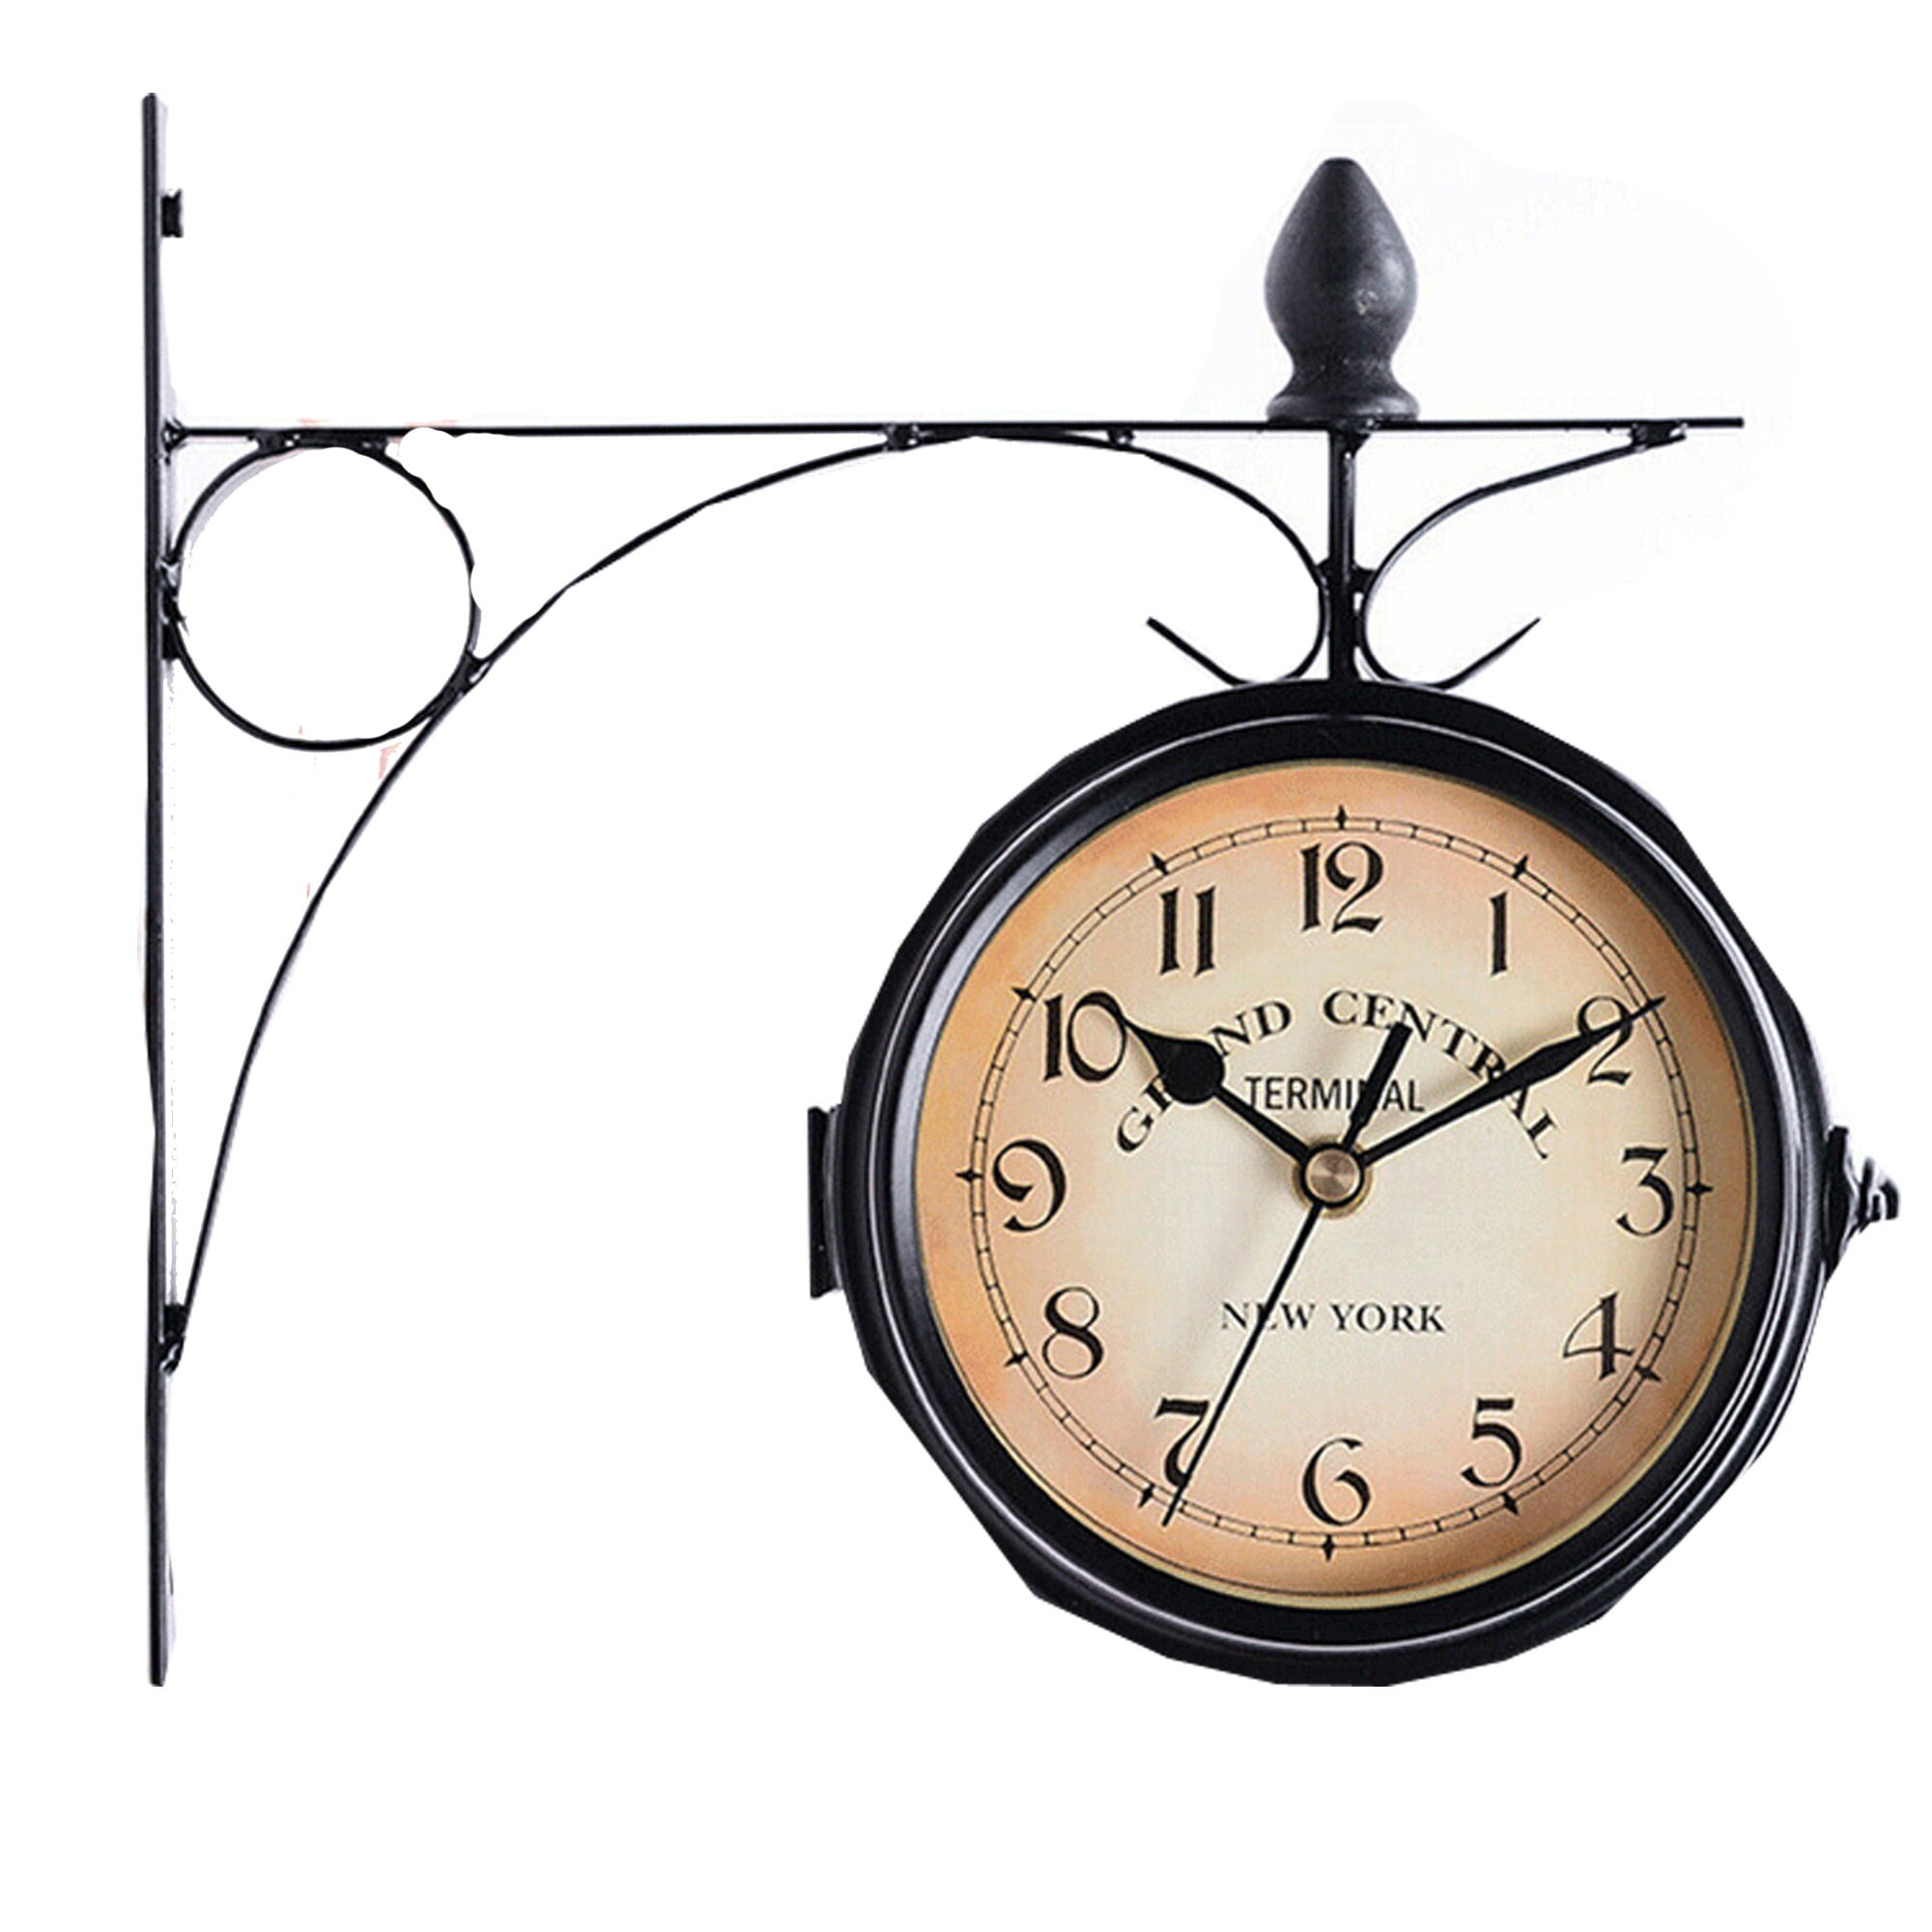 Antique Luxury Silver Double Sided Wall Clock Art Home Decor Station Clock Gift 